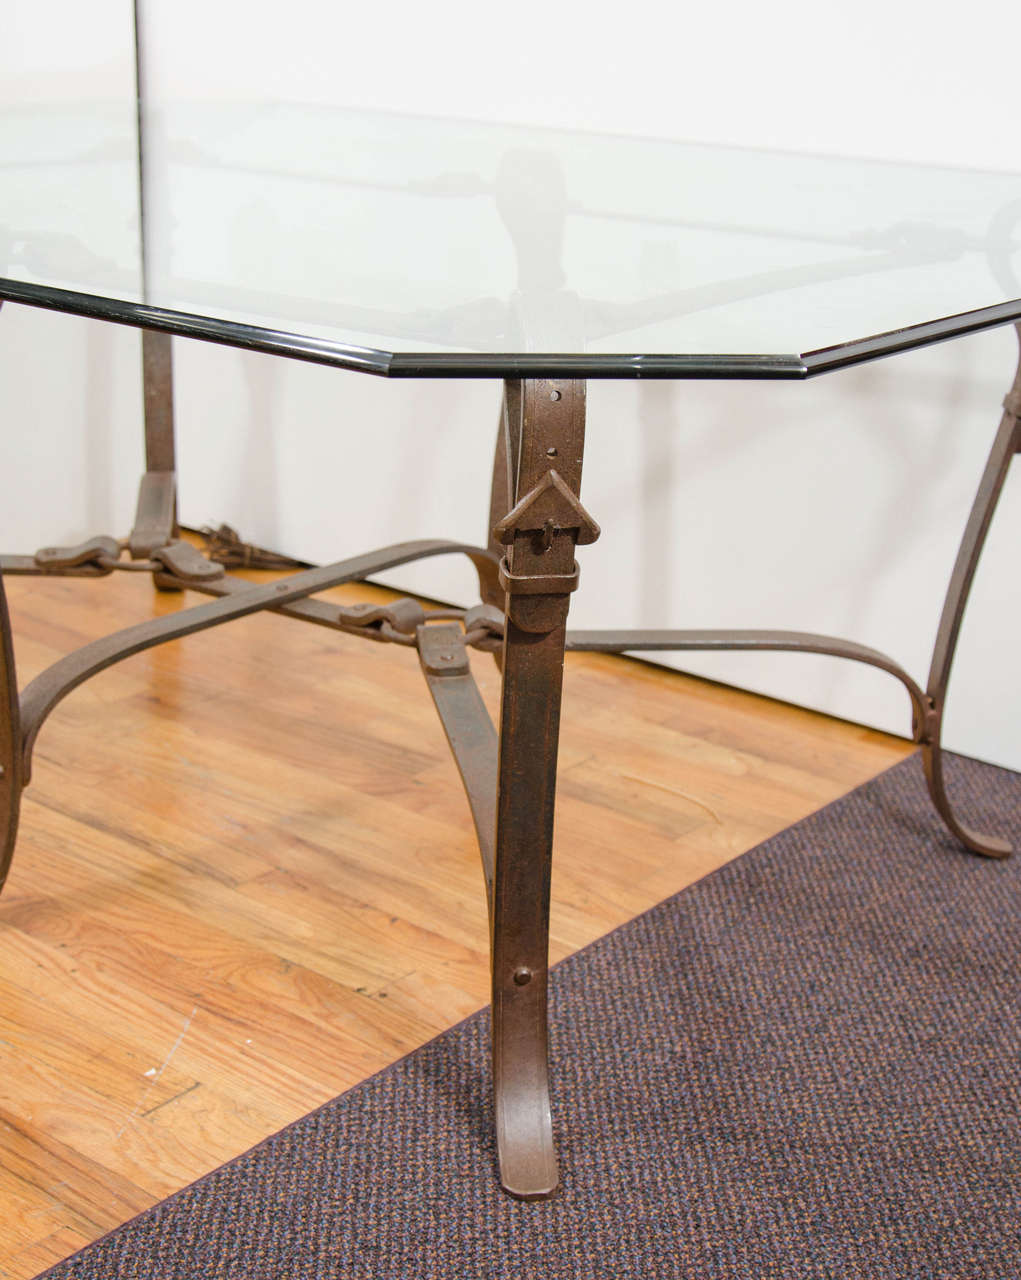 Italian  Stunning Modernist Gucci Influenced Equestrian Hand-Forged Iron Table For Sale